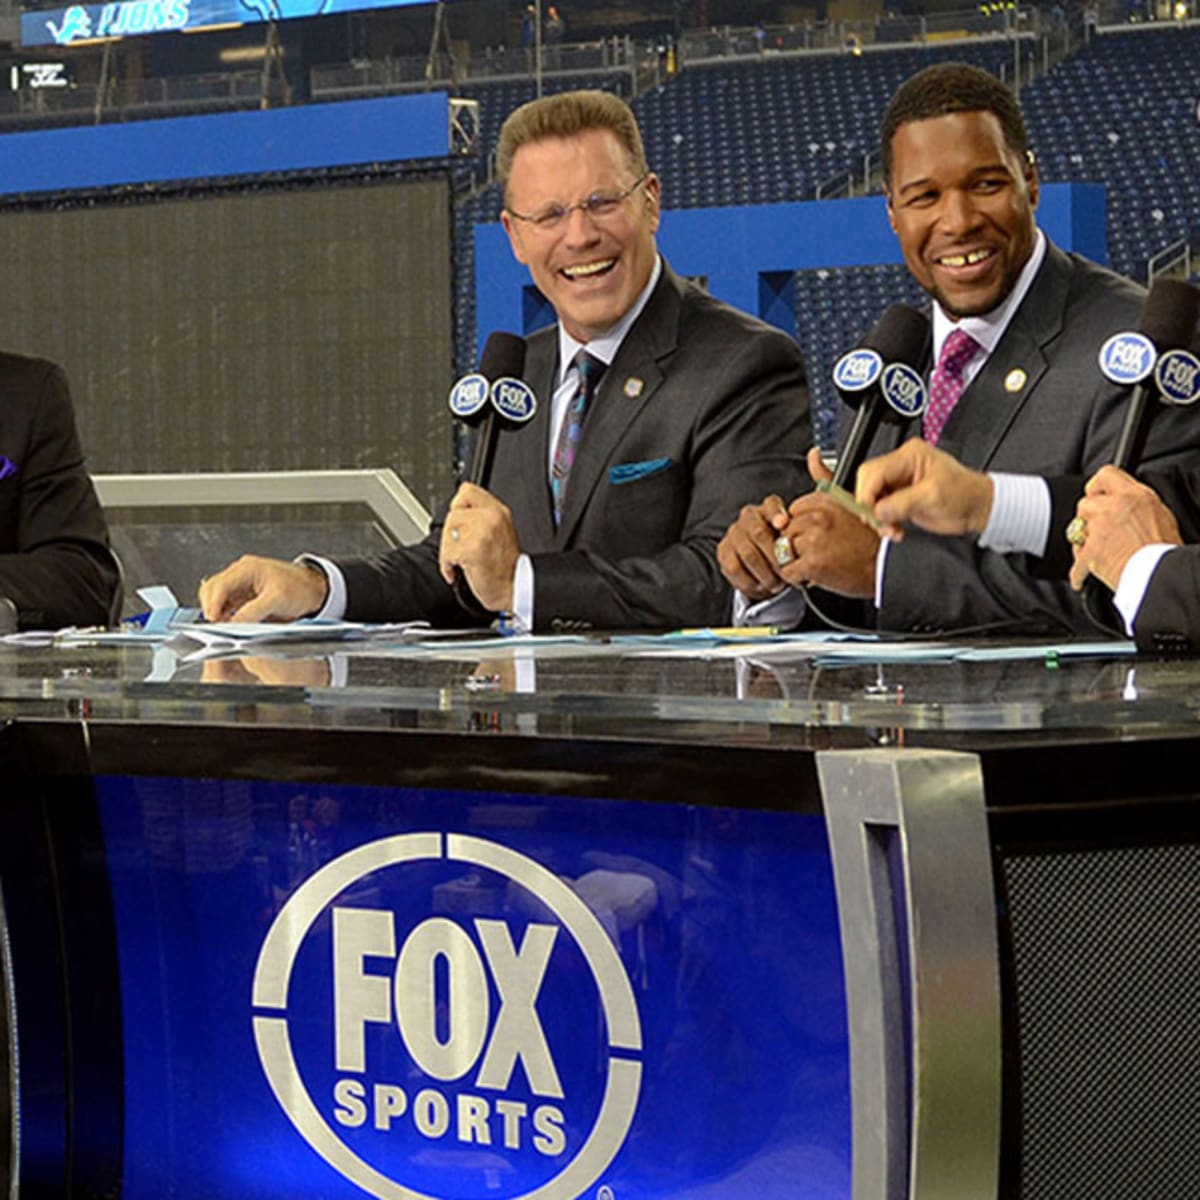 Fox's Thursday Football Studio Show Comes to NYC With Michael Strahan -  Men's Journal